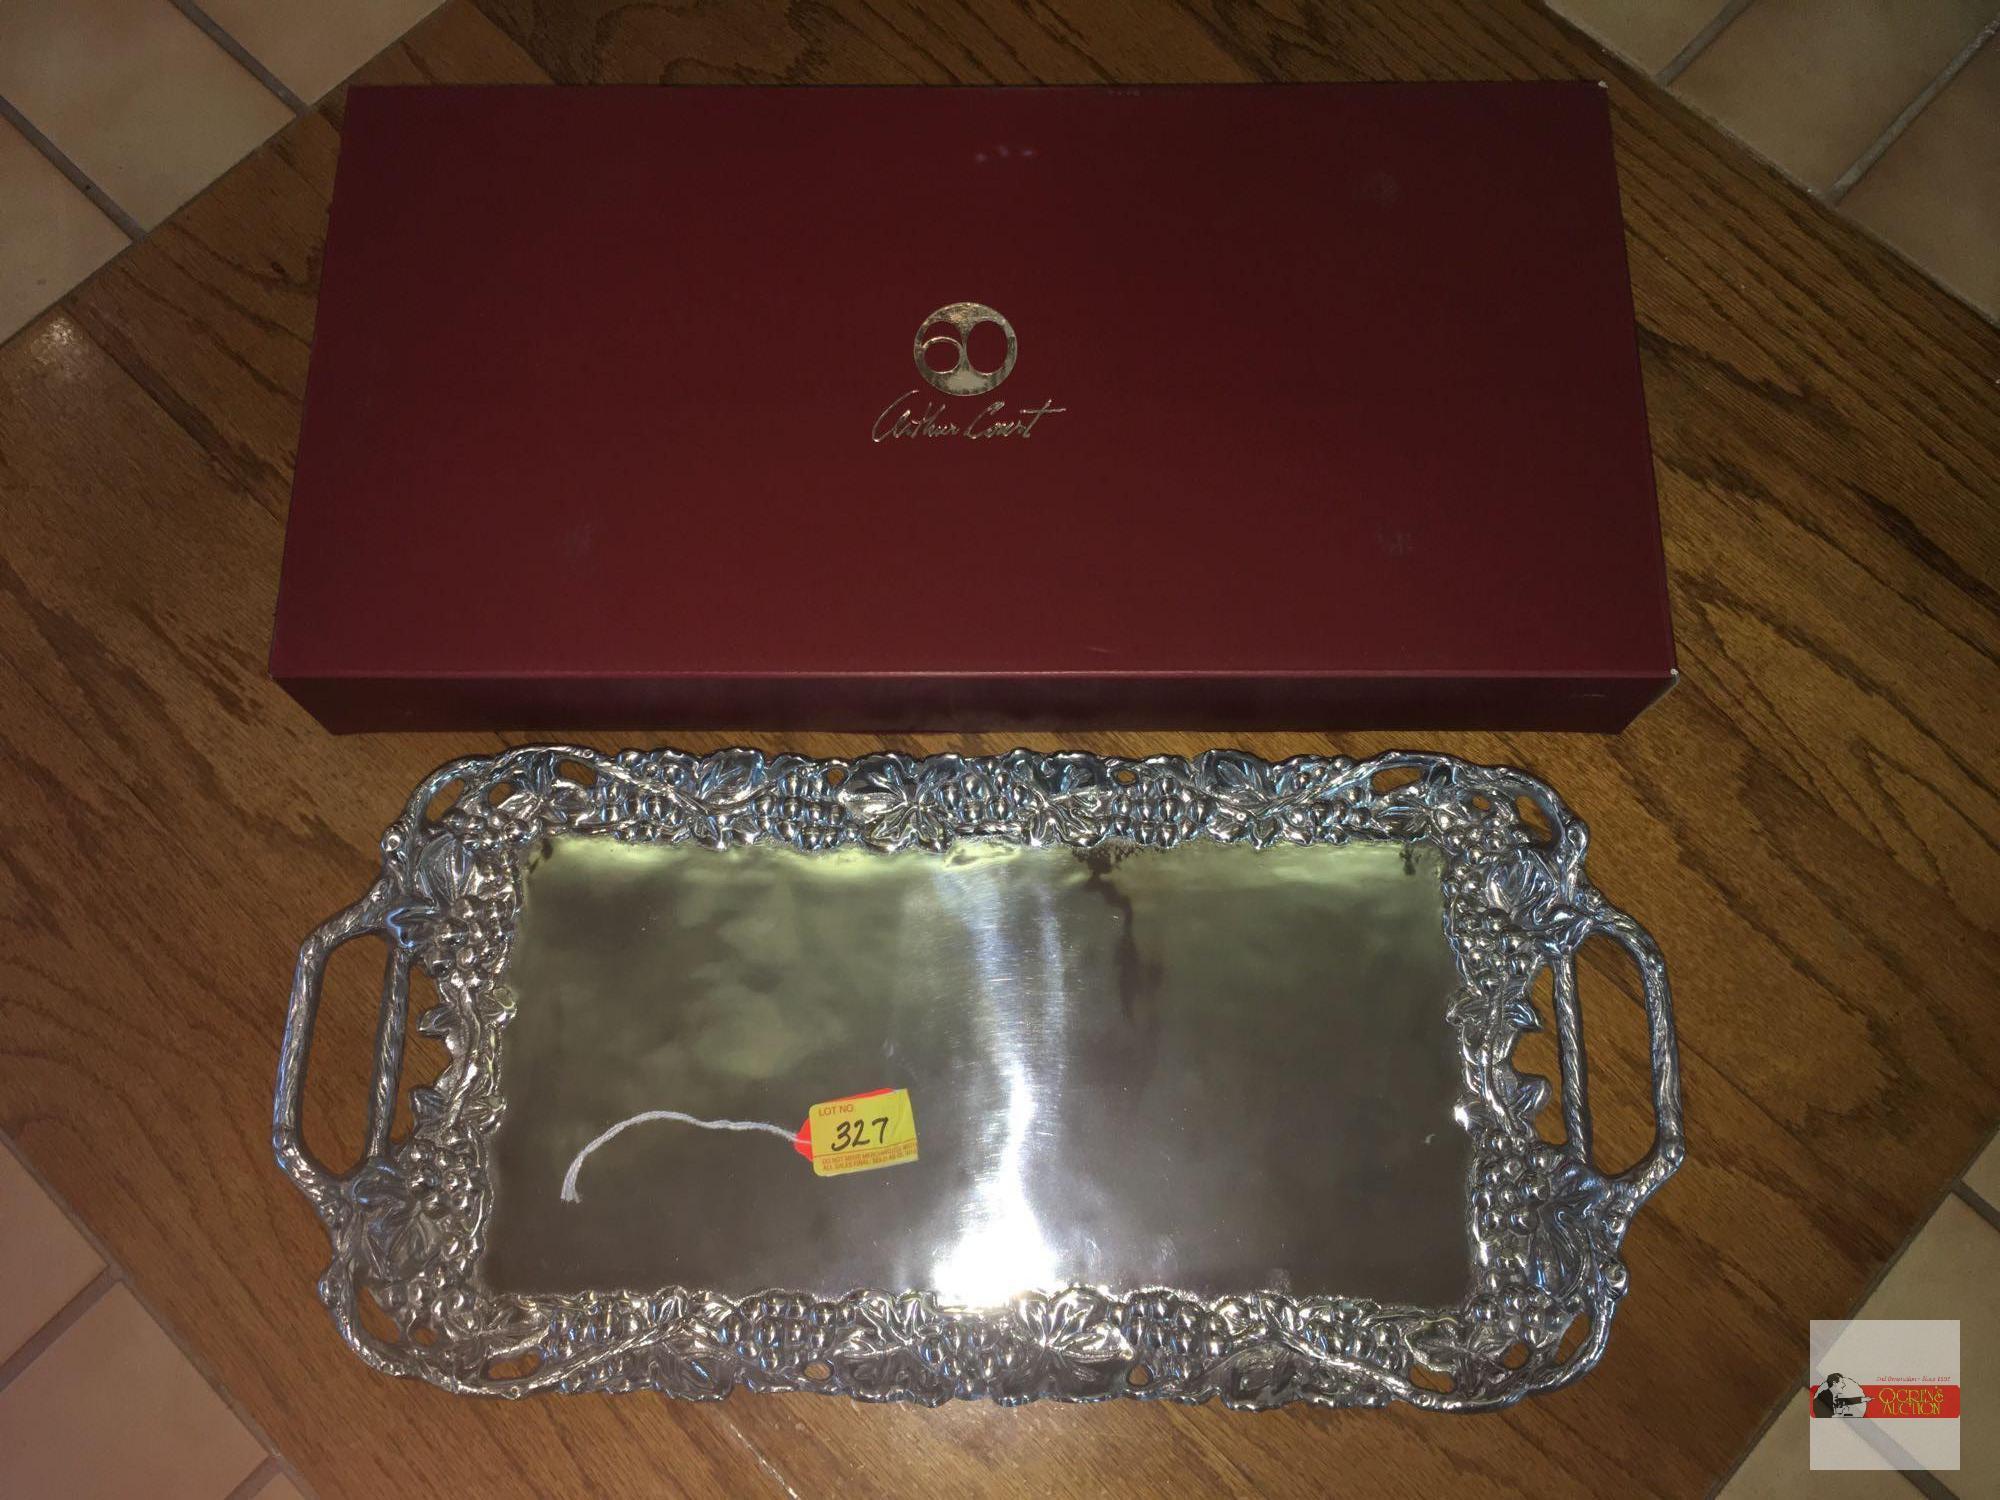 Arthur Court - 2011 Grape serving tray, double handles, 21.5"wx10.5"w, orig. box marked $125.00